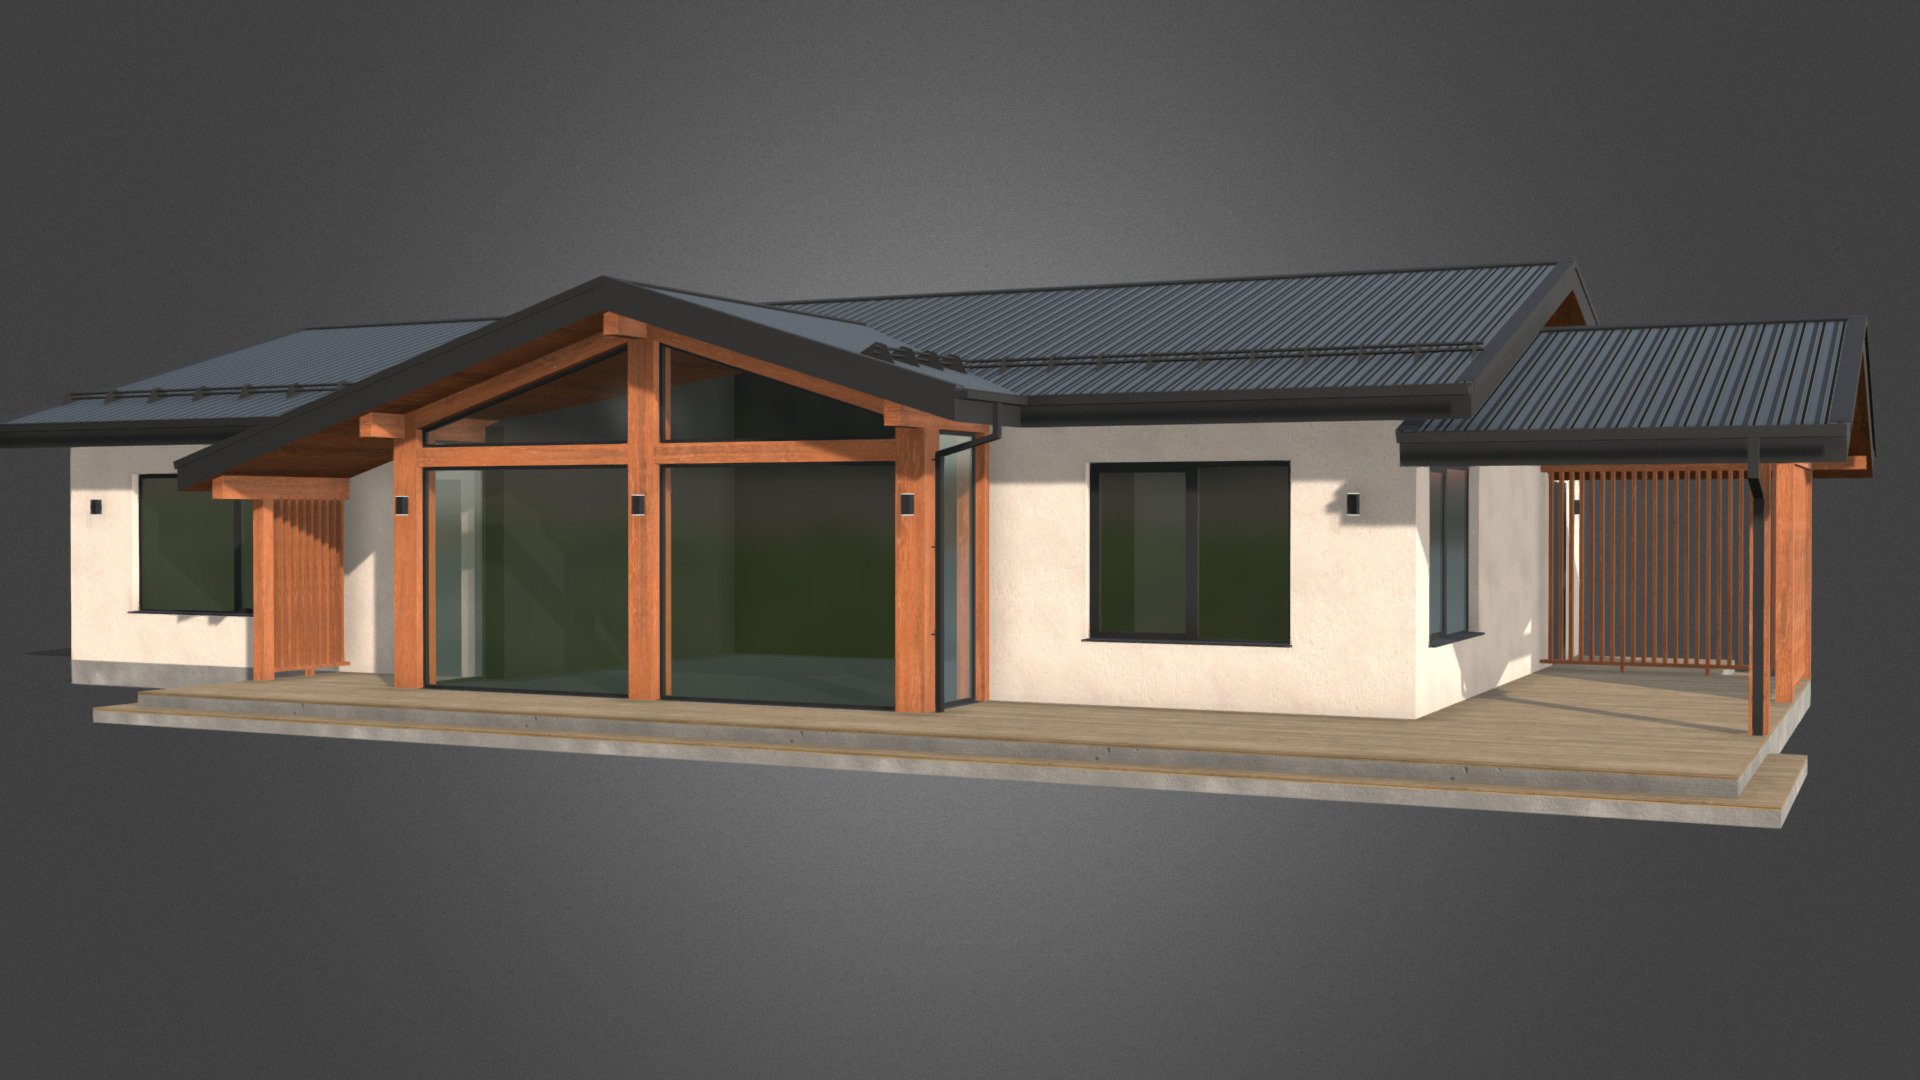 the model was created in ArchiCAD - house №05 - 3D model by sgraffito 3d model